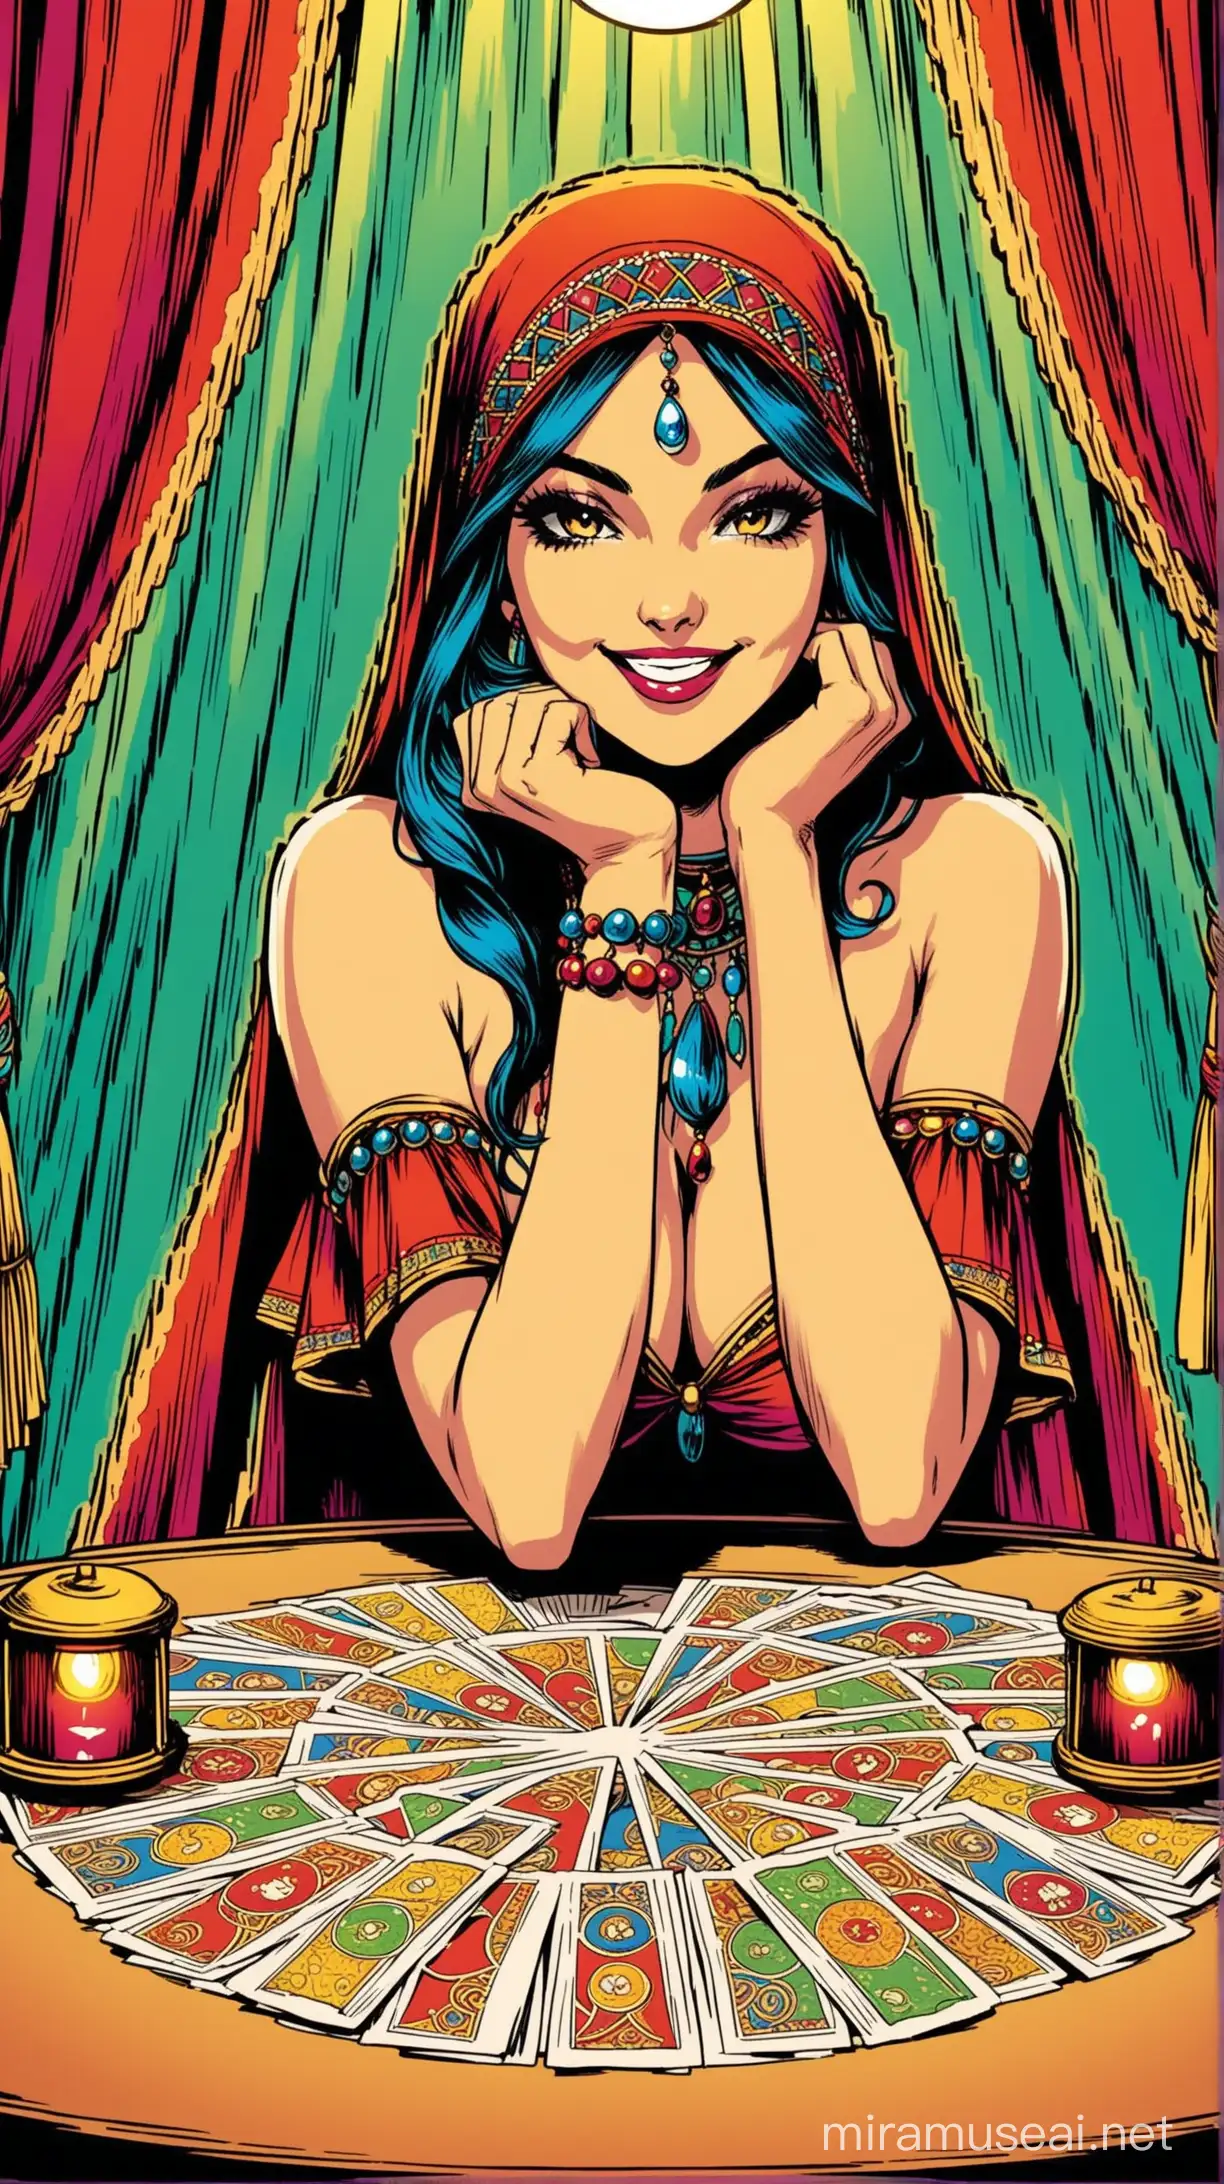 beautiful female fortune teller, smiling, sexy, gypsy, sitting behind table, mysterious curtains, marvel comic style, vintage